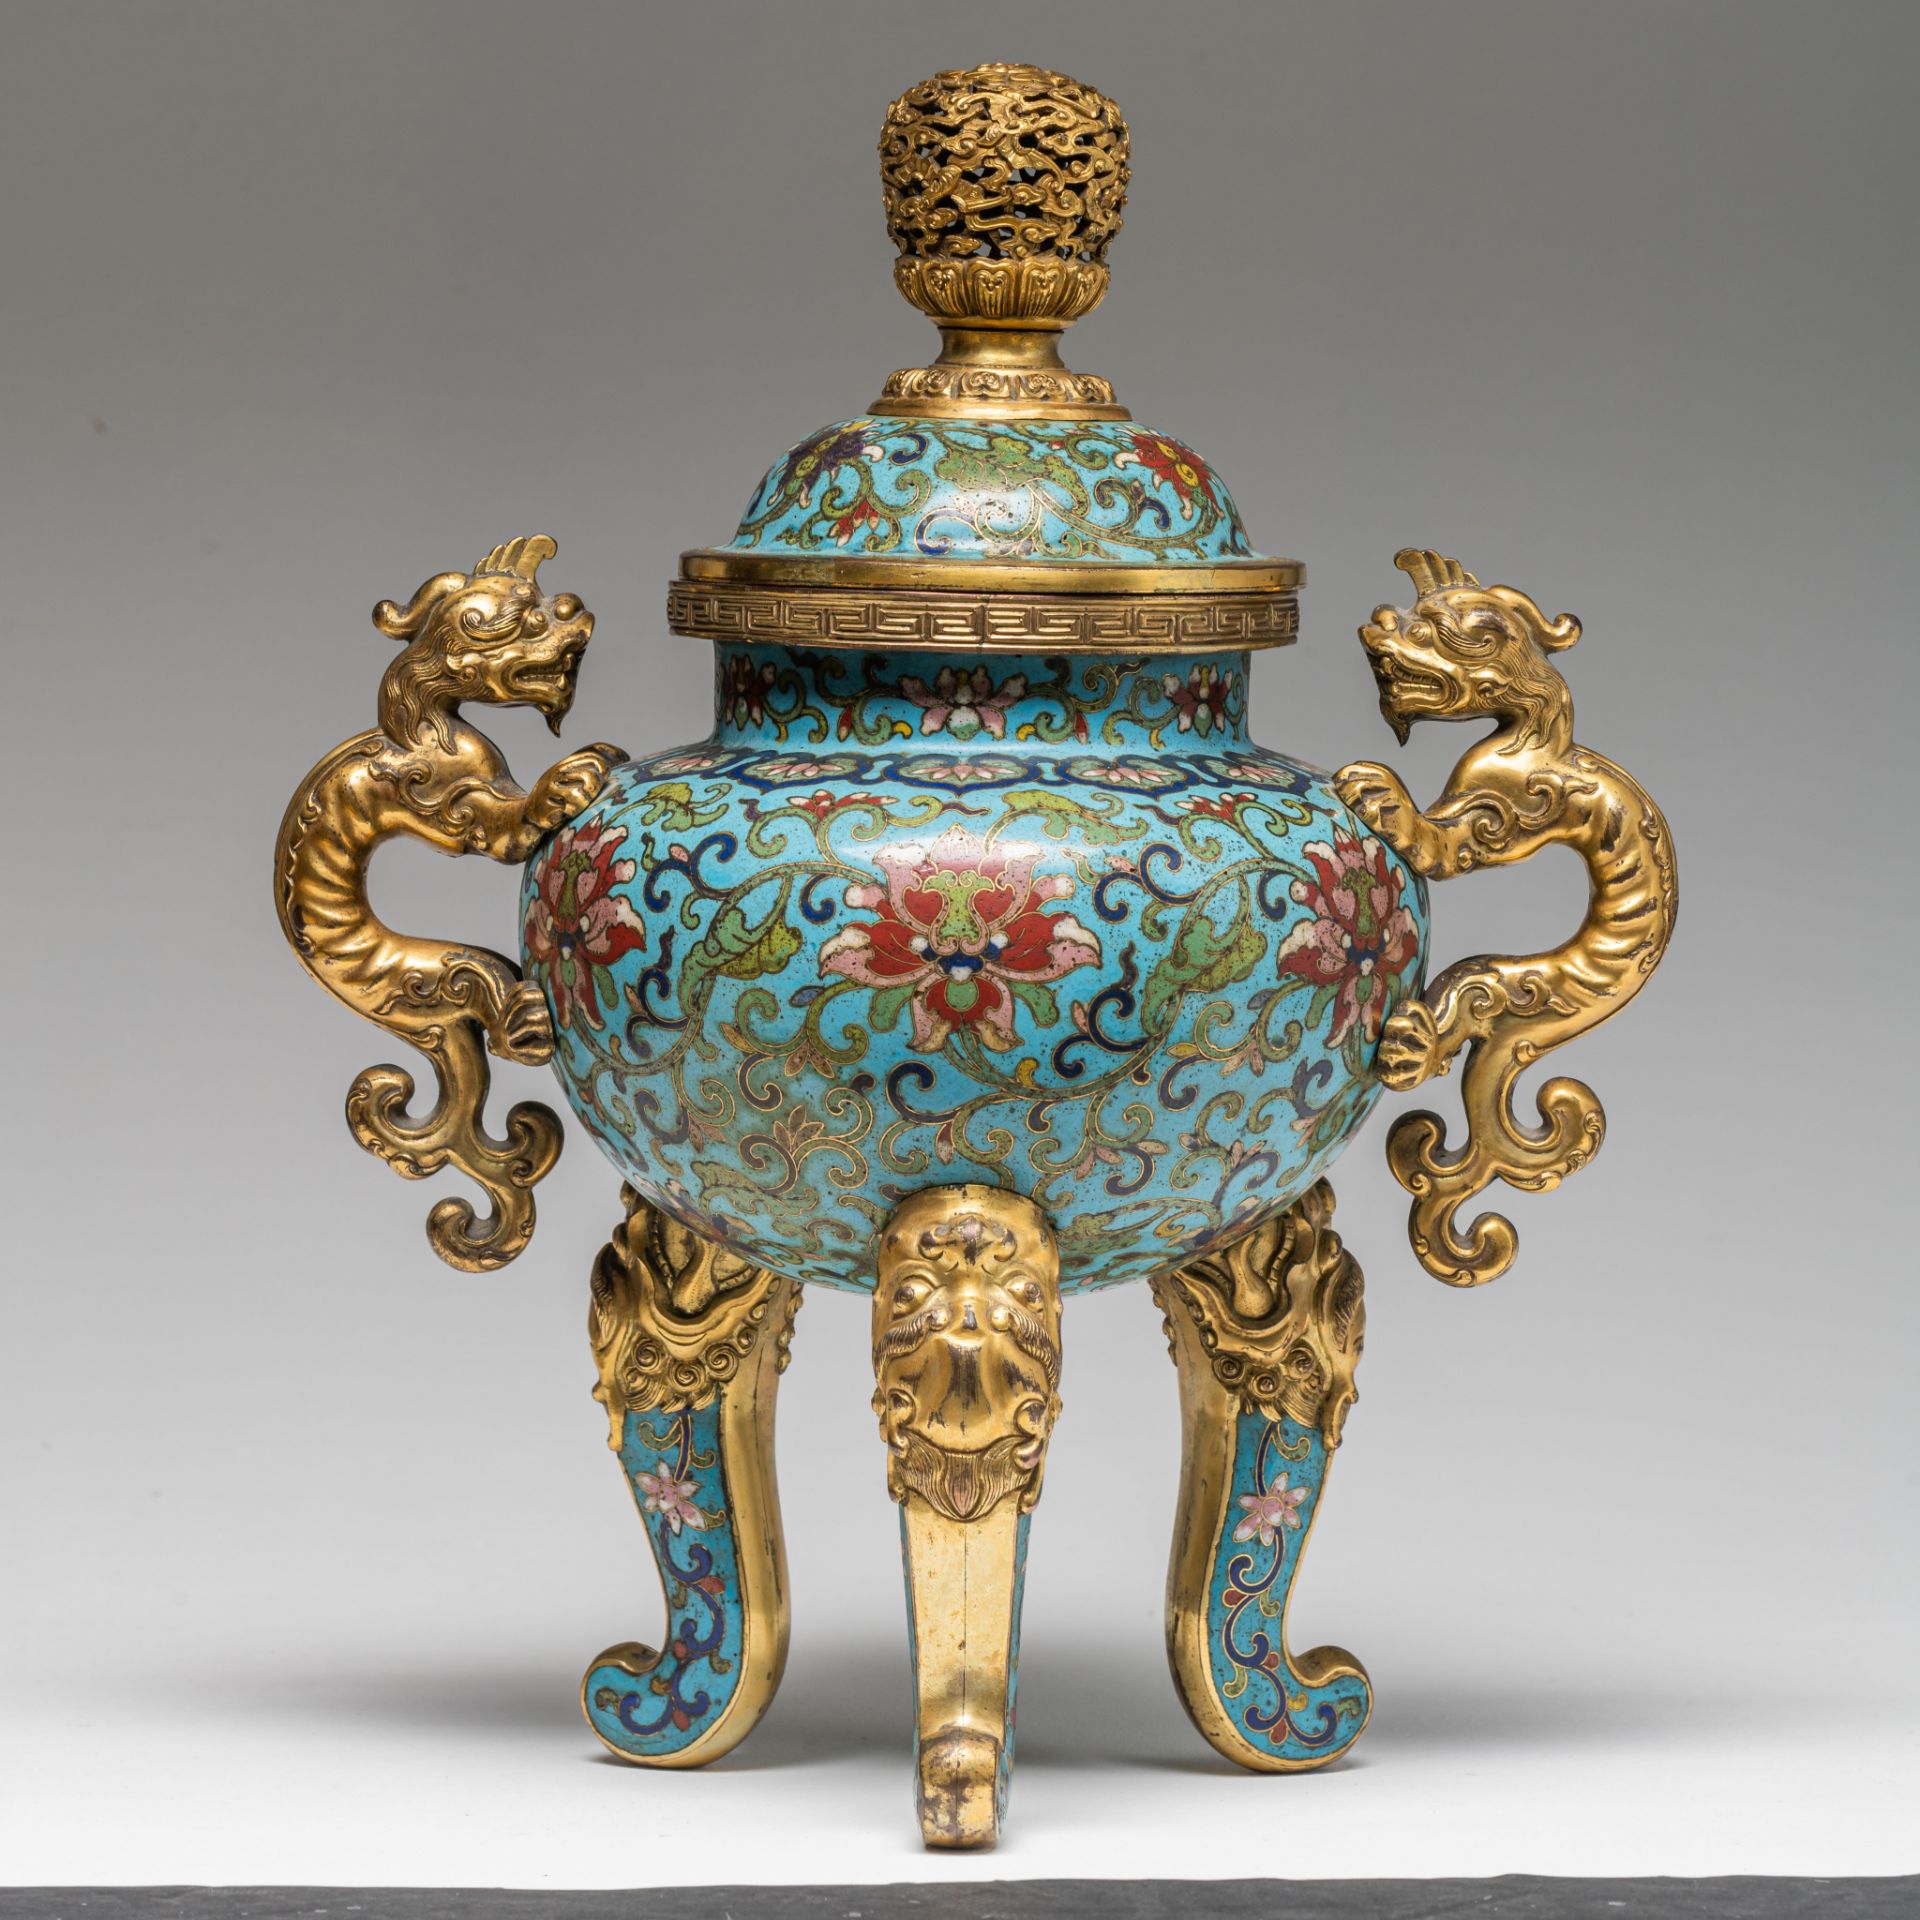 A fine Chinese cloisonne enamelled tripod censer and cover, late 18thC, H 32,8 cm - Image 3 of 8